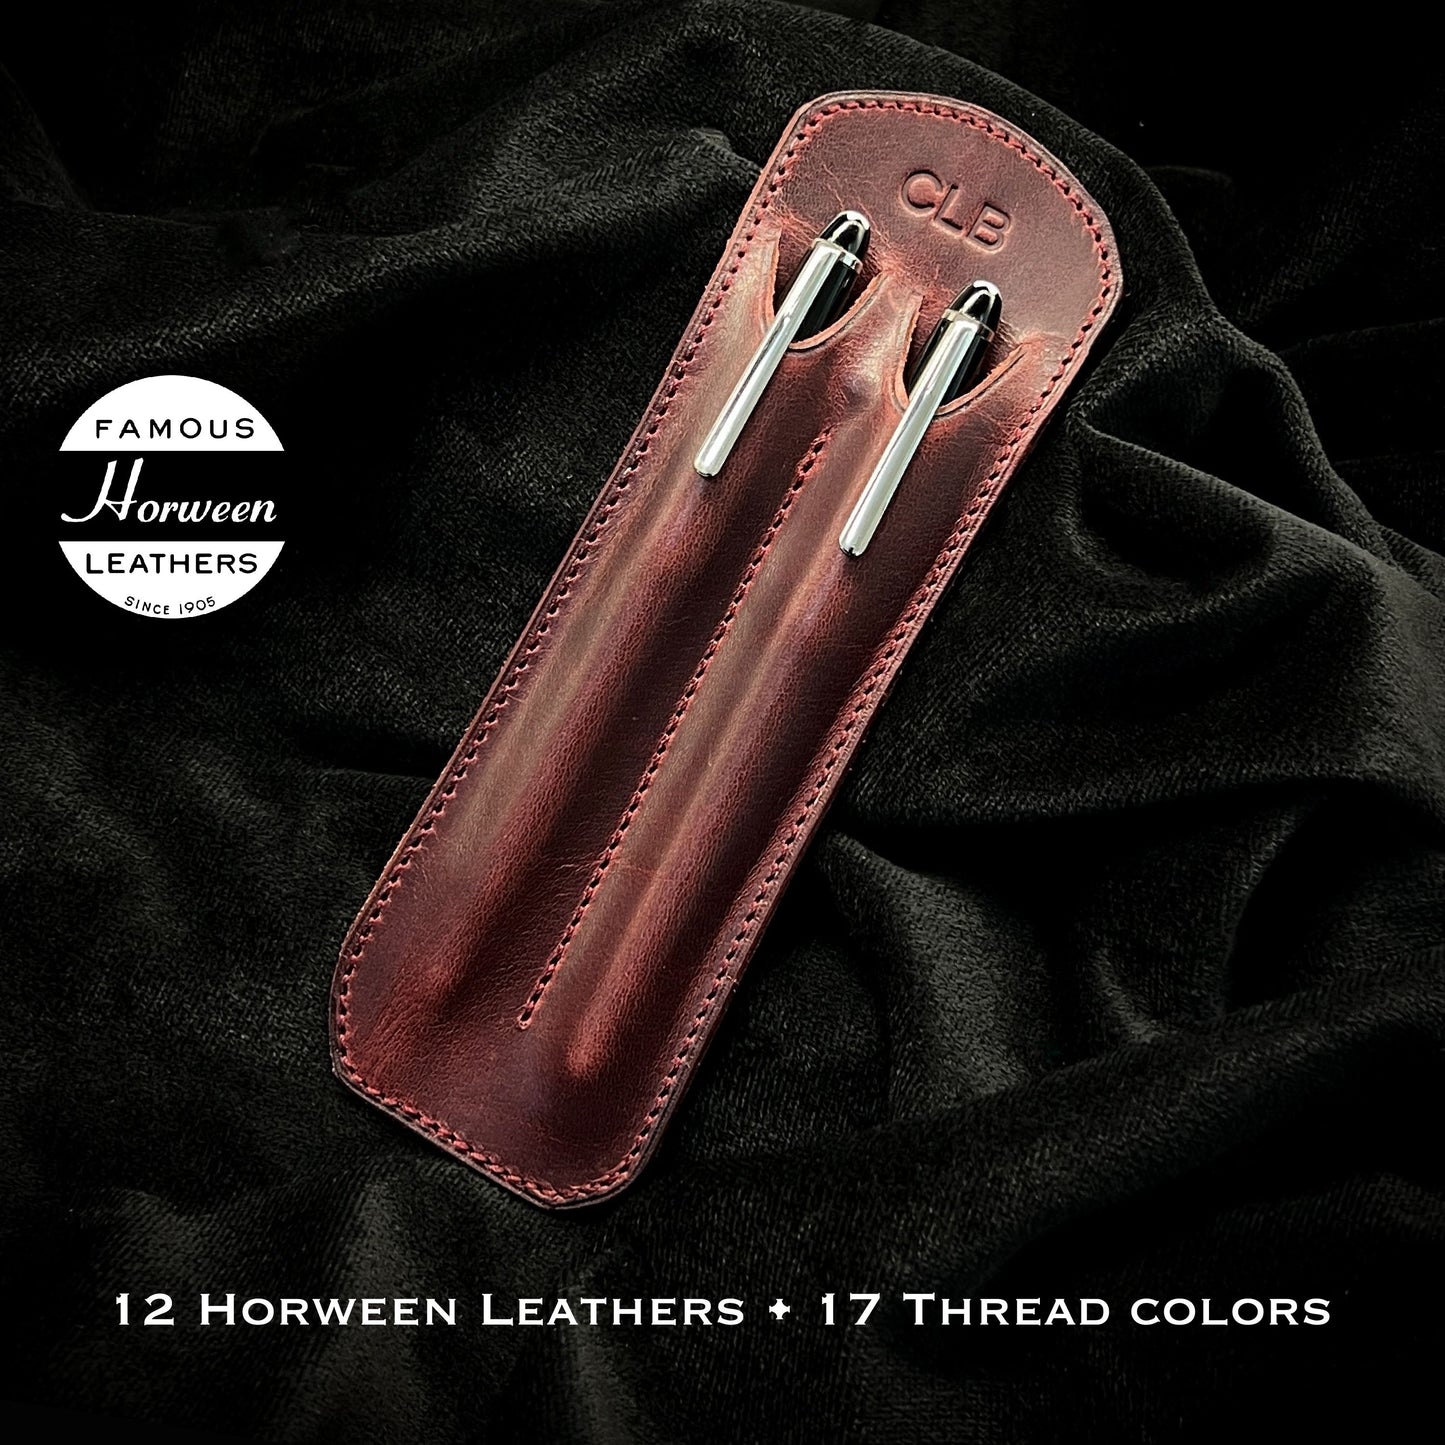 Handmade Double Pen Sleeve Case | Dual Pen Pouch | Horween Leather